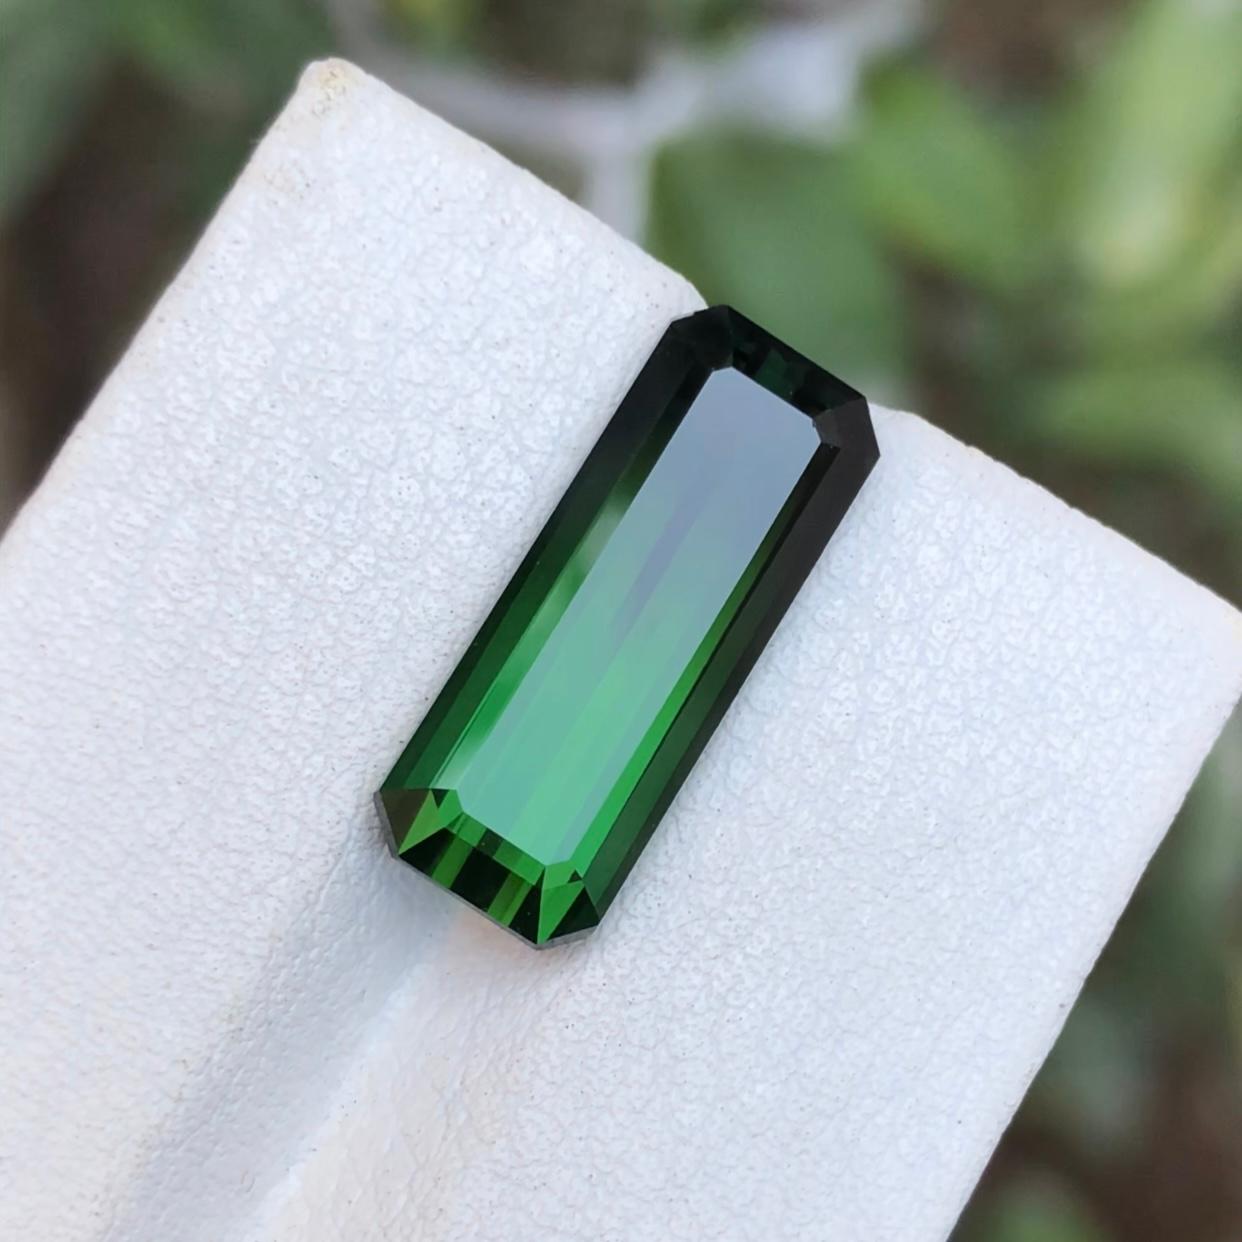 GEMSTONE TYPE: Tourmaline
PIECE(S): 1
WEIGHT: 7.35 Carats
SHAPE: Emerald Cut
SIZE (MM):  18.08 x 7.08 x 5.88
COLOR: Green & Black Bicolor
CLARITY: Eye Clean
TREATMENT: None
ORIGIN: Afghanistan
CERTIFICATE: On demand

This 7.35 carat natural